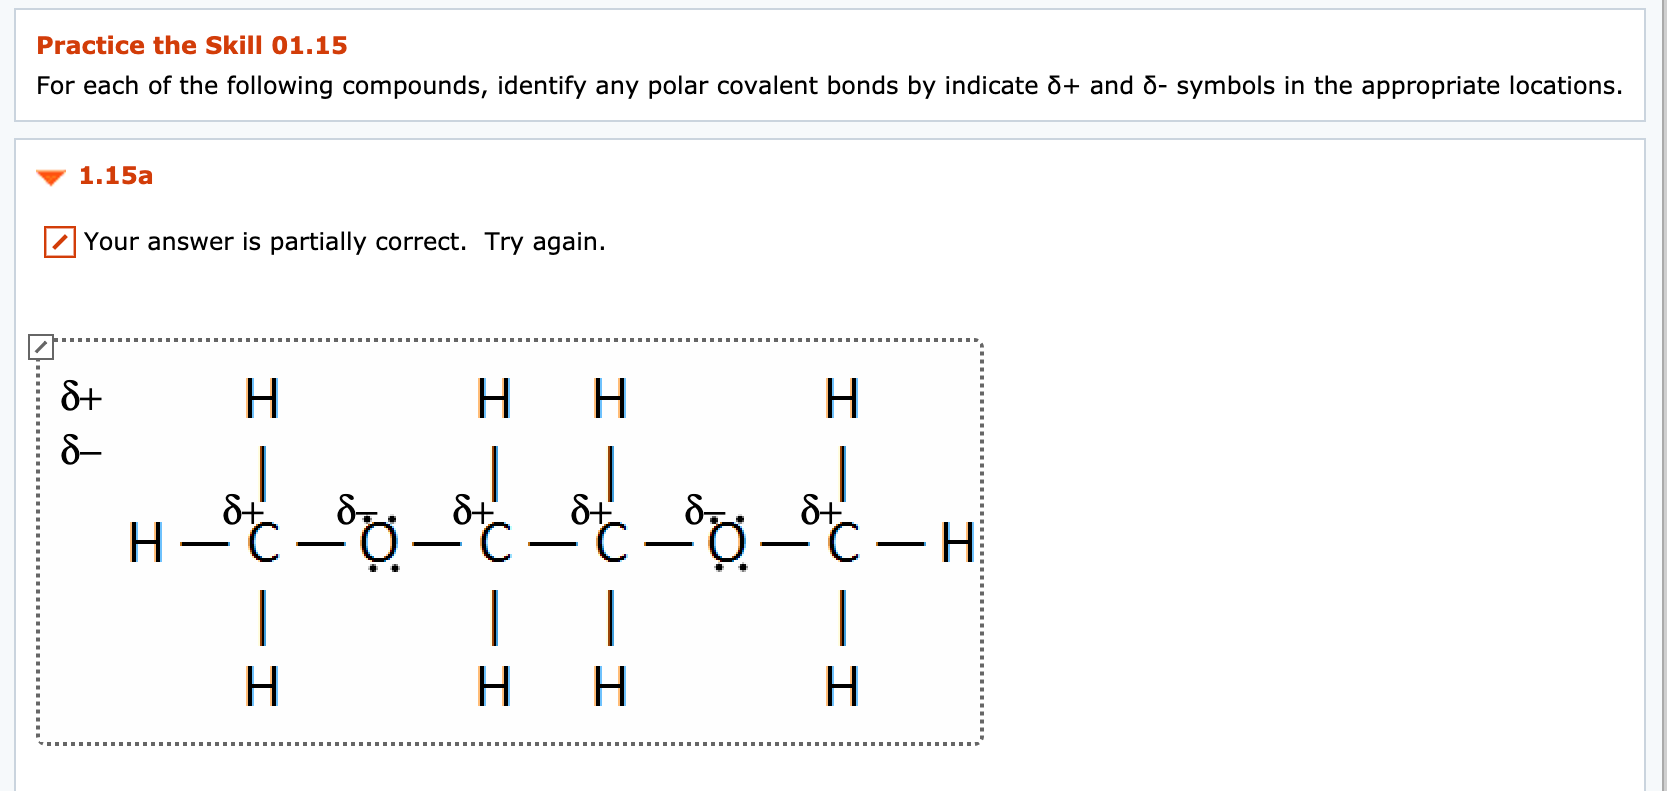 Practice the Skill 01.15
For each of the following compounds, identify any polar covalent bonds by indicate õ+ and d- symbols in the appropriate locations.
1.15a
Your answer is partially correct. Try again.
H.
H.
H
C-H
|
-
|
|
H.
H.
